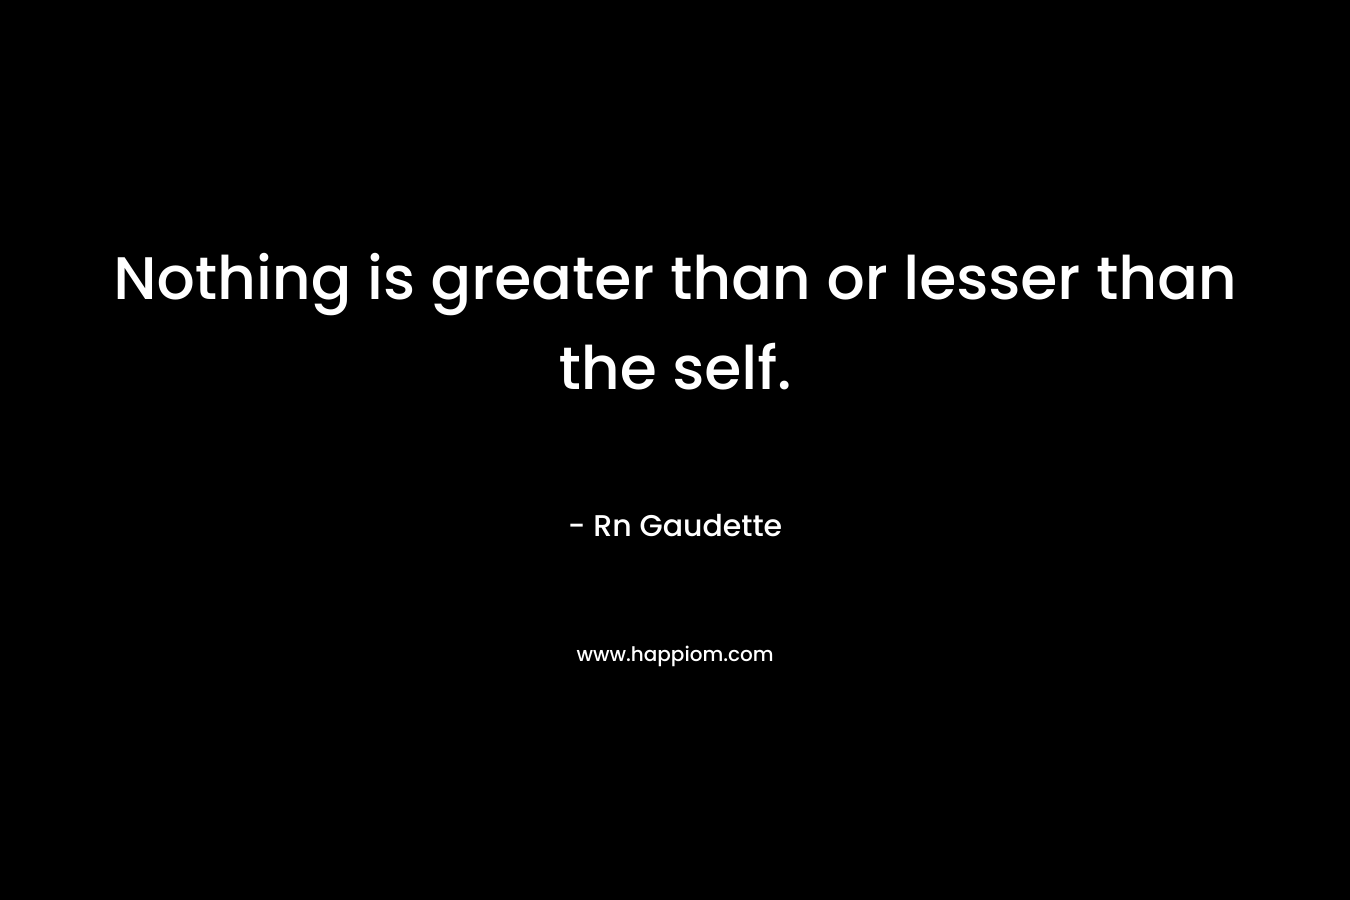 Nothing is greater than or lesser than the self. – Rn Gaudette